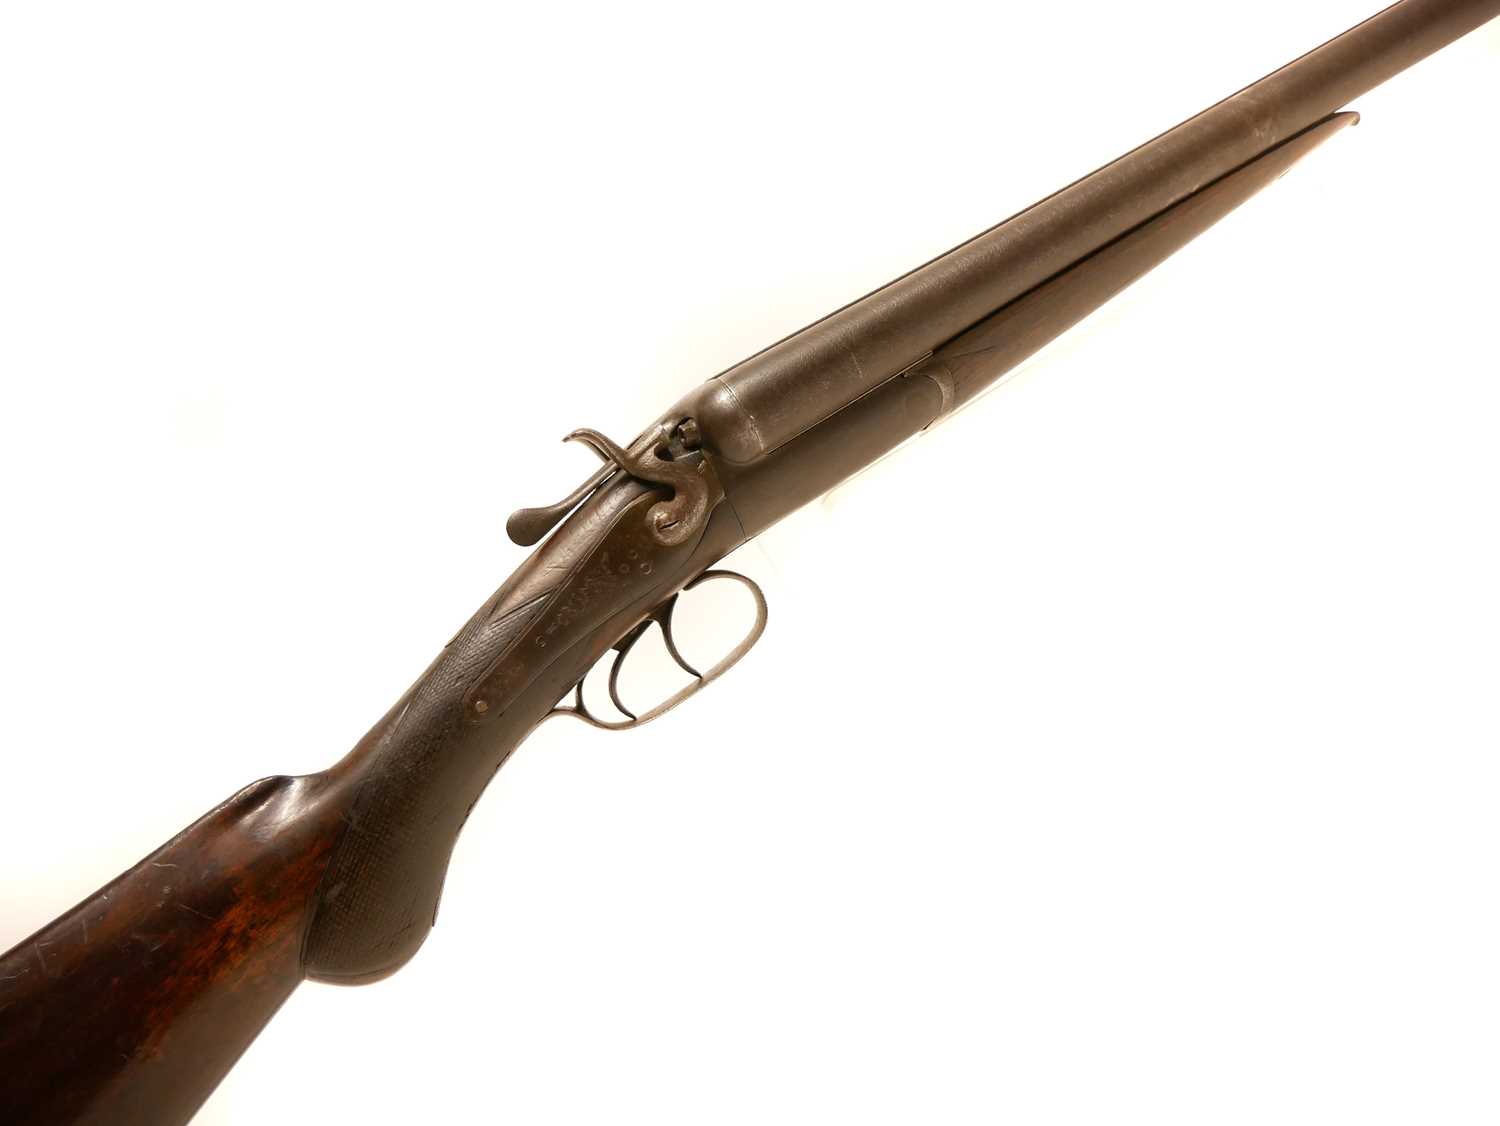 Deactivated 12 bore side by side shotgun with 21inch barrels, serial number 5105. Deactivated to